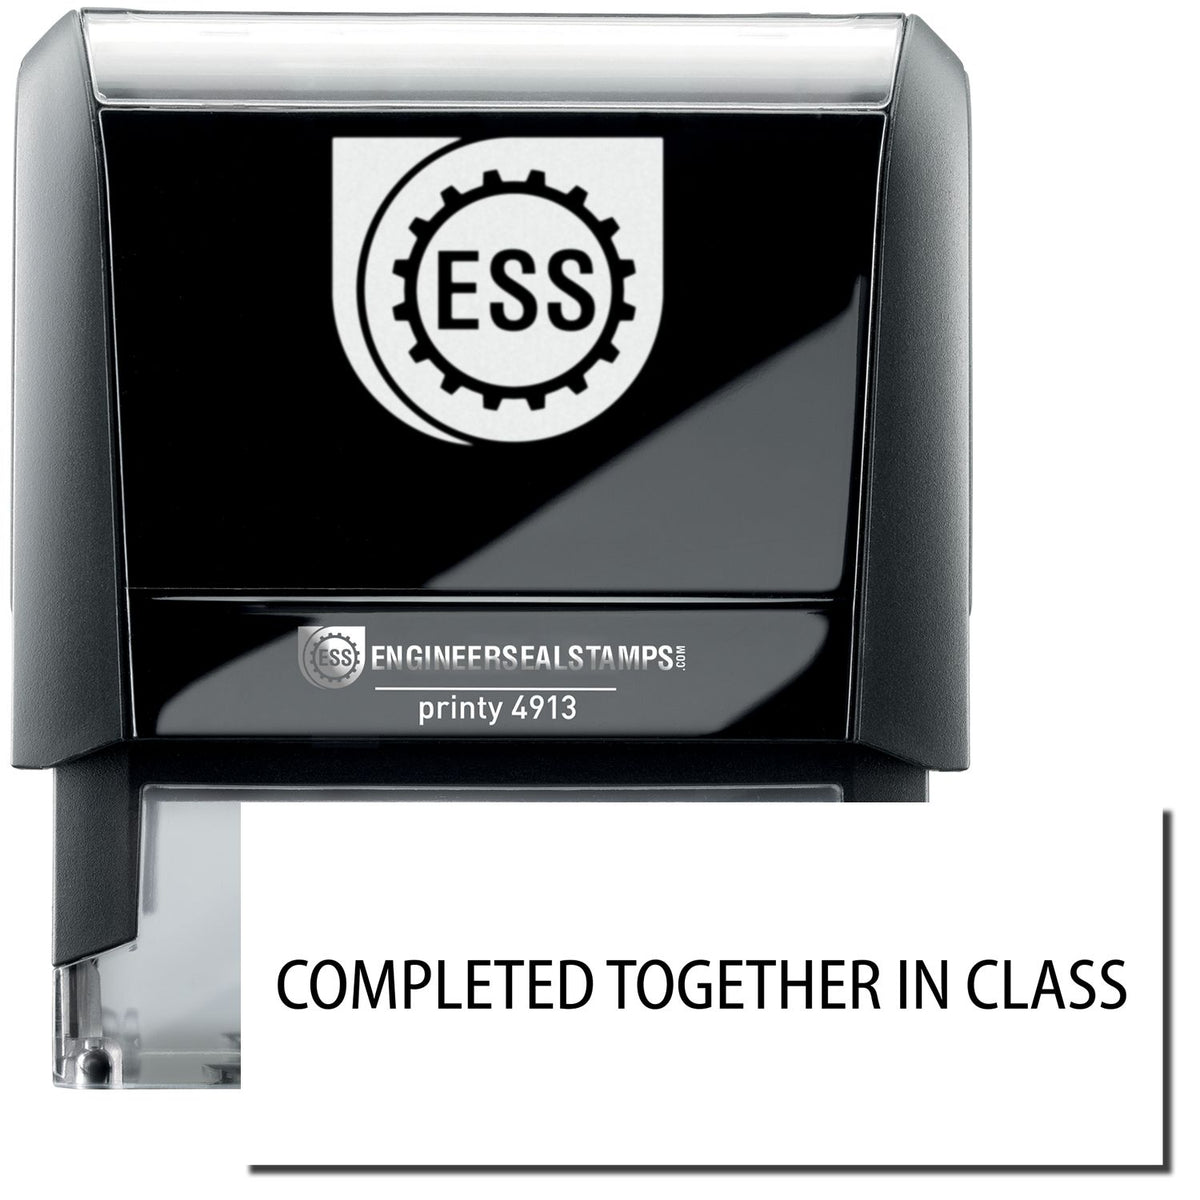 A self-inking stamp with a stamped image showing how the text &quot;COMPLETED TOGETHER IN CLASS&quot; in a large font is displayed by it after stamping.